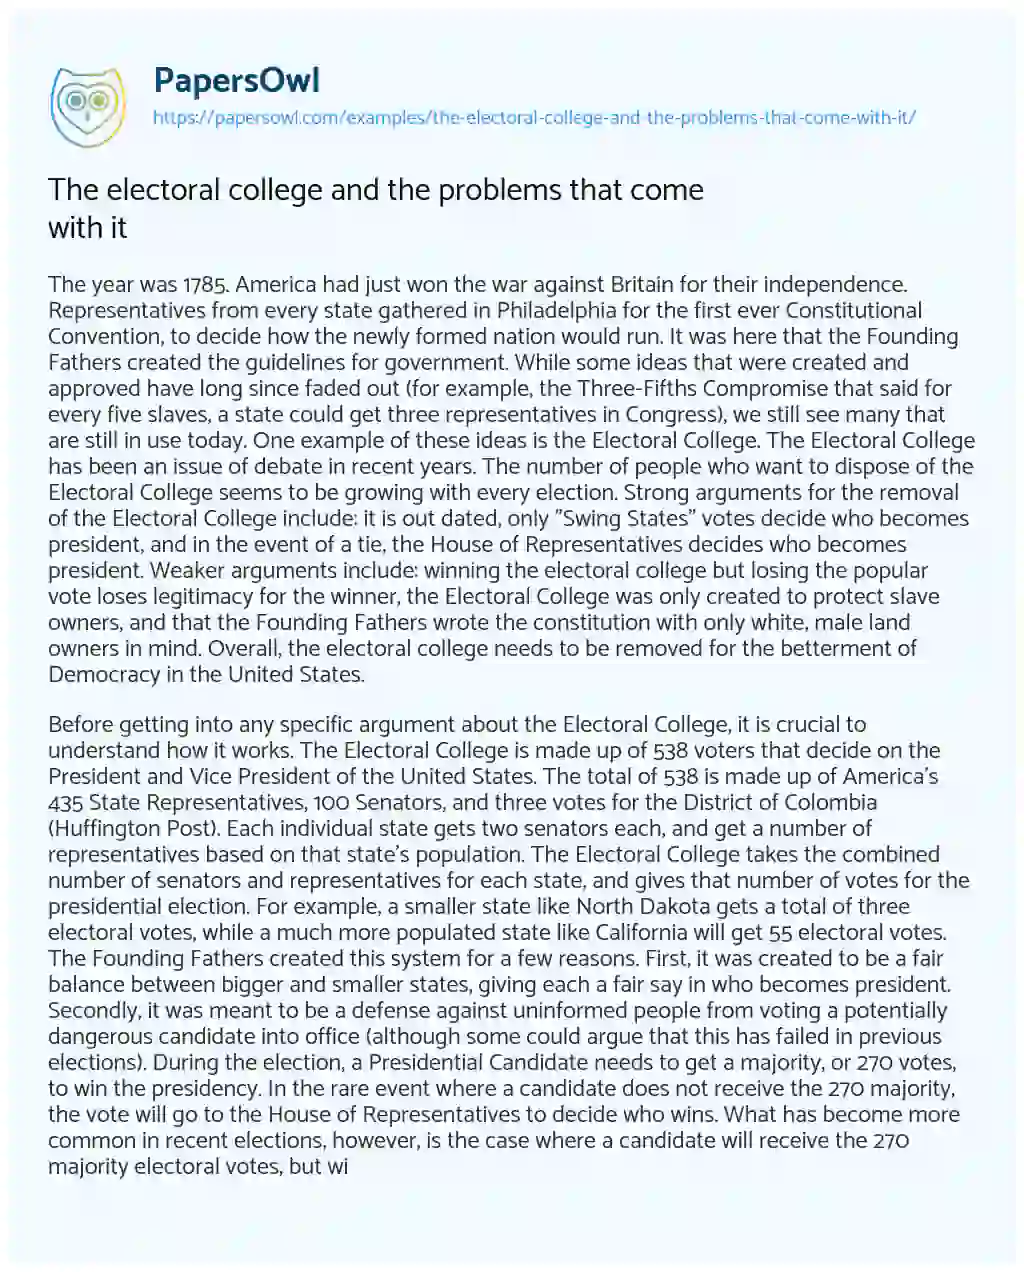 Essay on The Electoral College and the Problems that Come with it